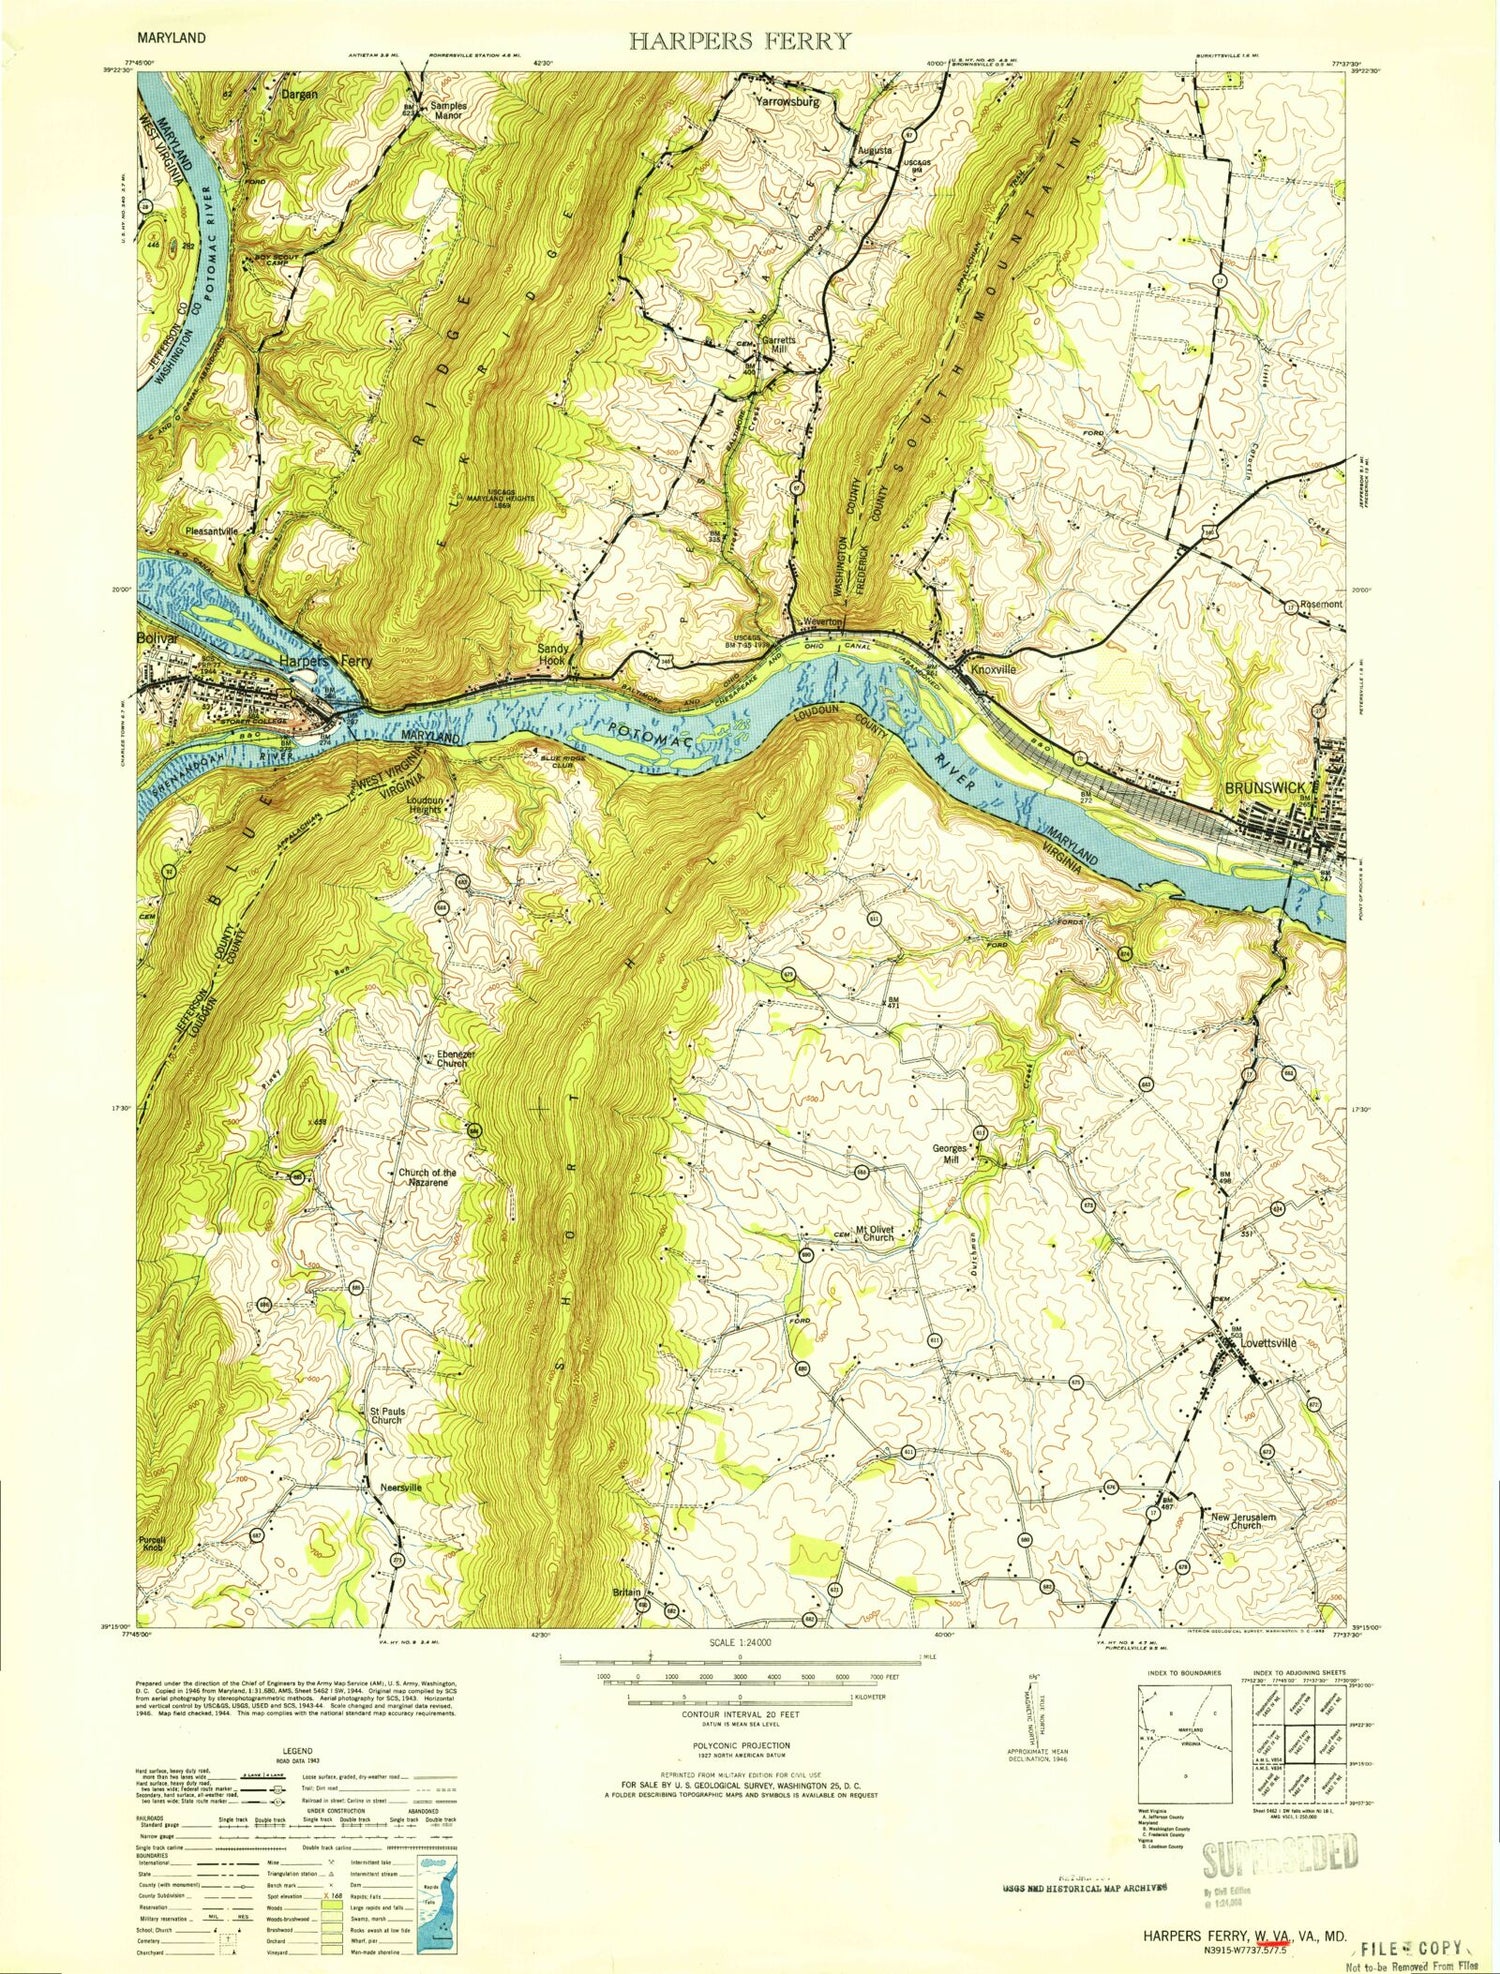 USGS Classic Harpers Ferry West Virginia 7.5'x7.5' Topo Map Image